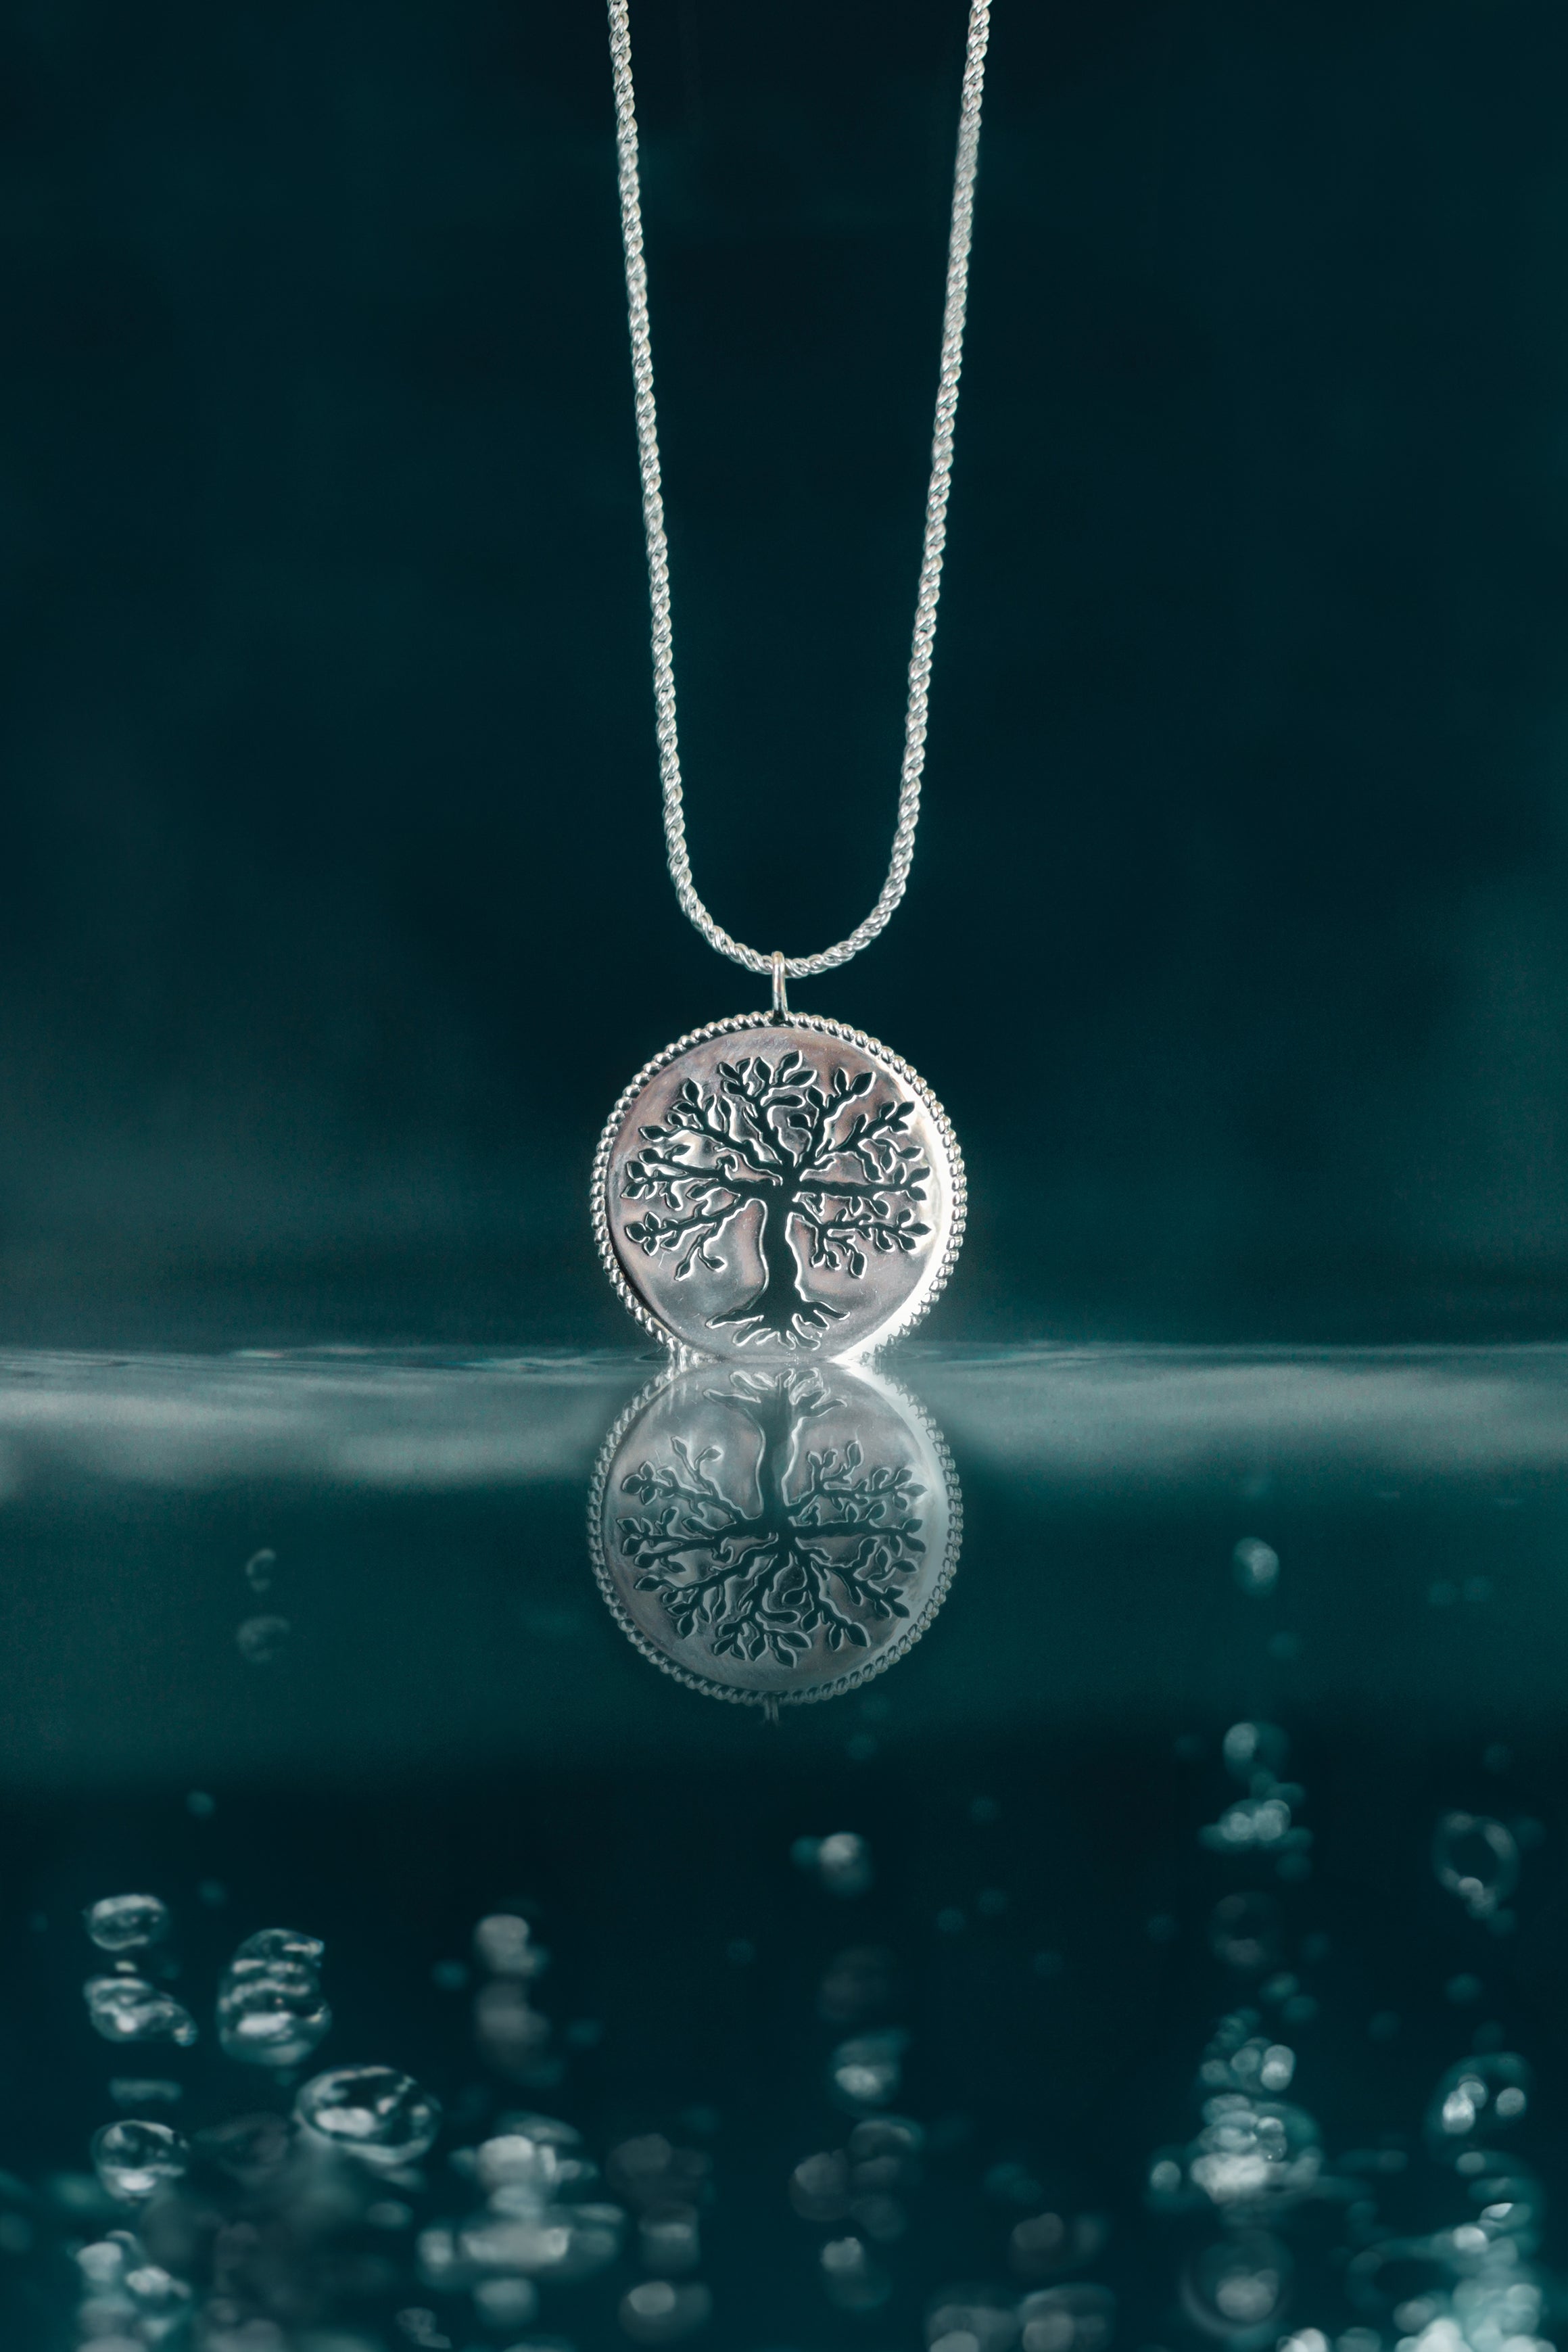 Rizen Jewelry sterling silver Rooted Olive Tree Necklace dipping into reflective depth colored water